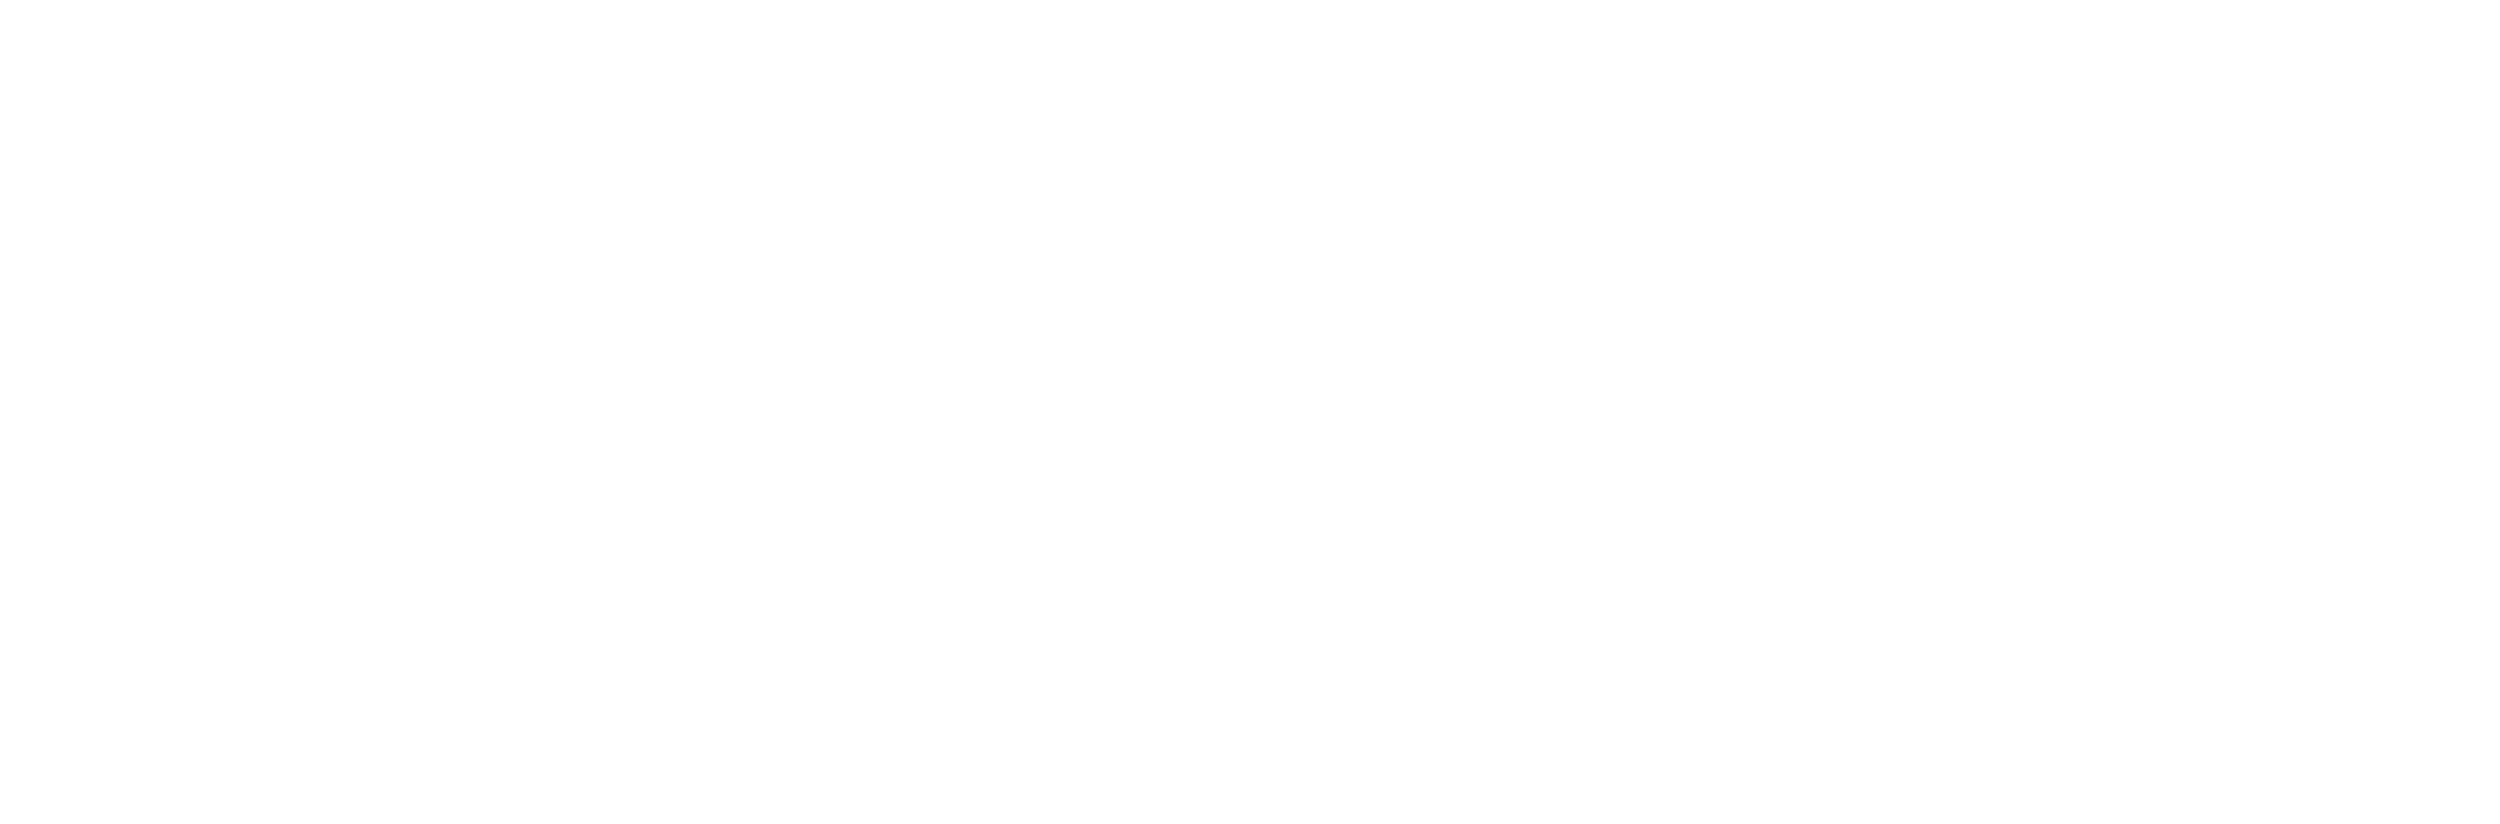 Pop, the Question Podcast